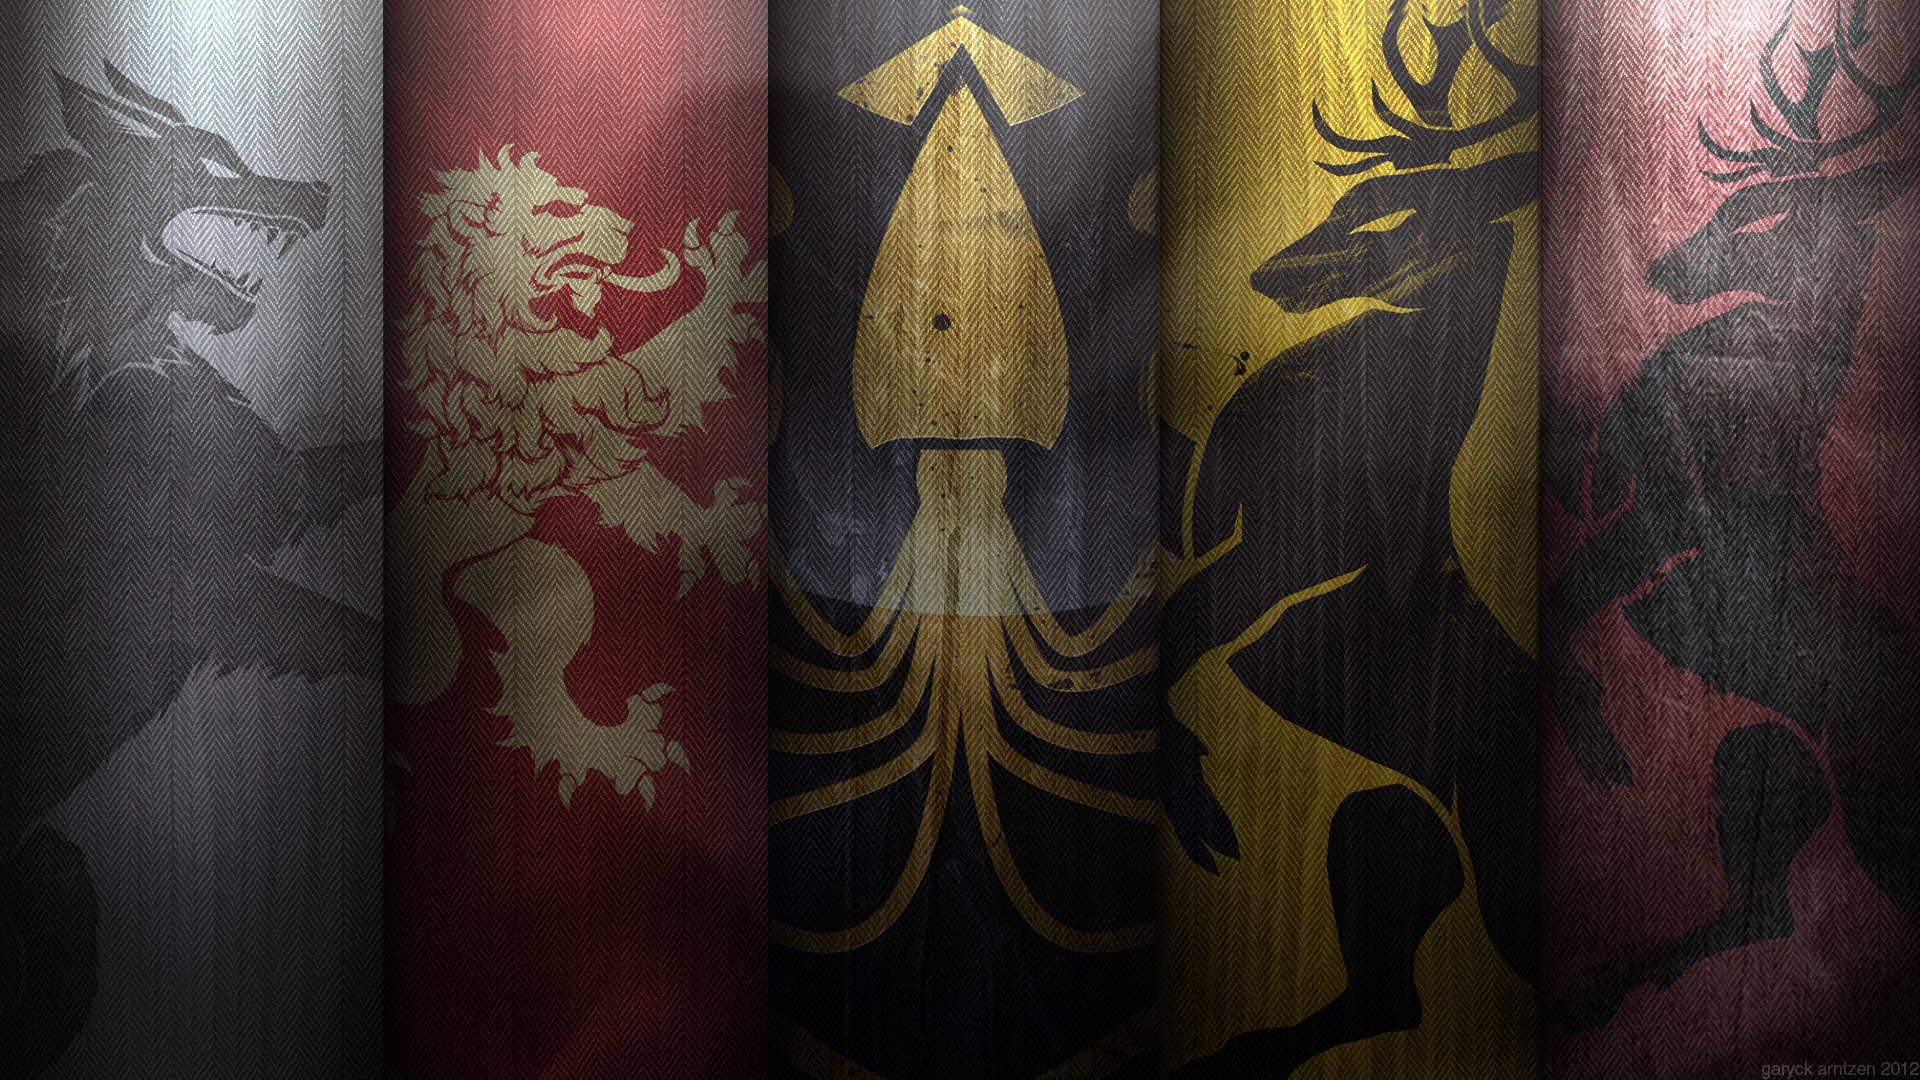 Game Of Thrones Image Wallpaper High Definition Quality